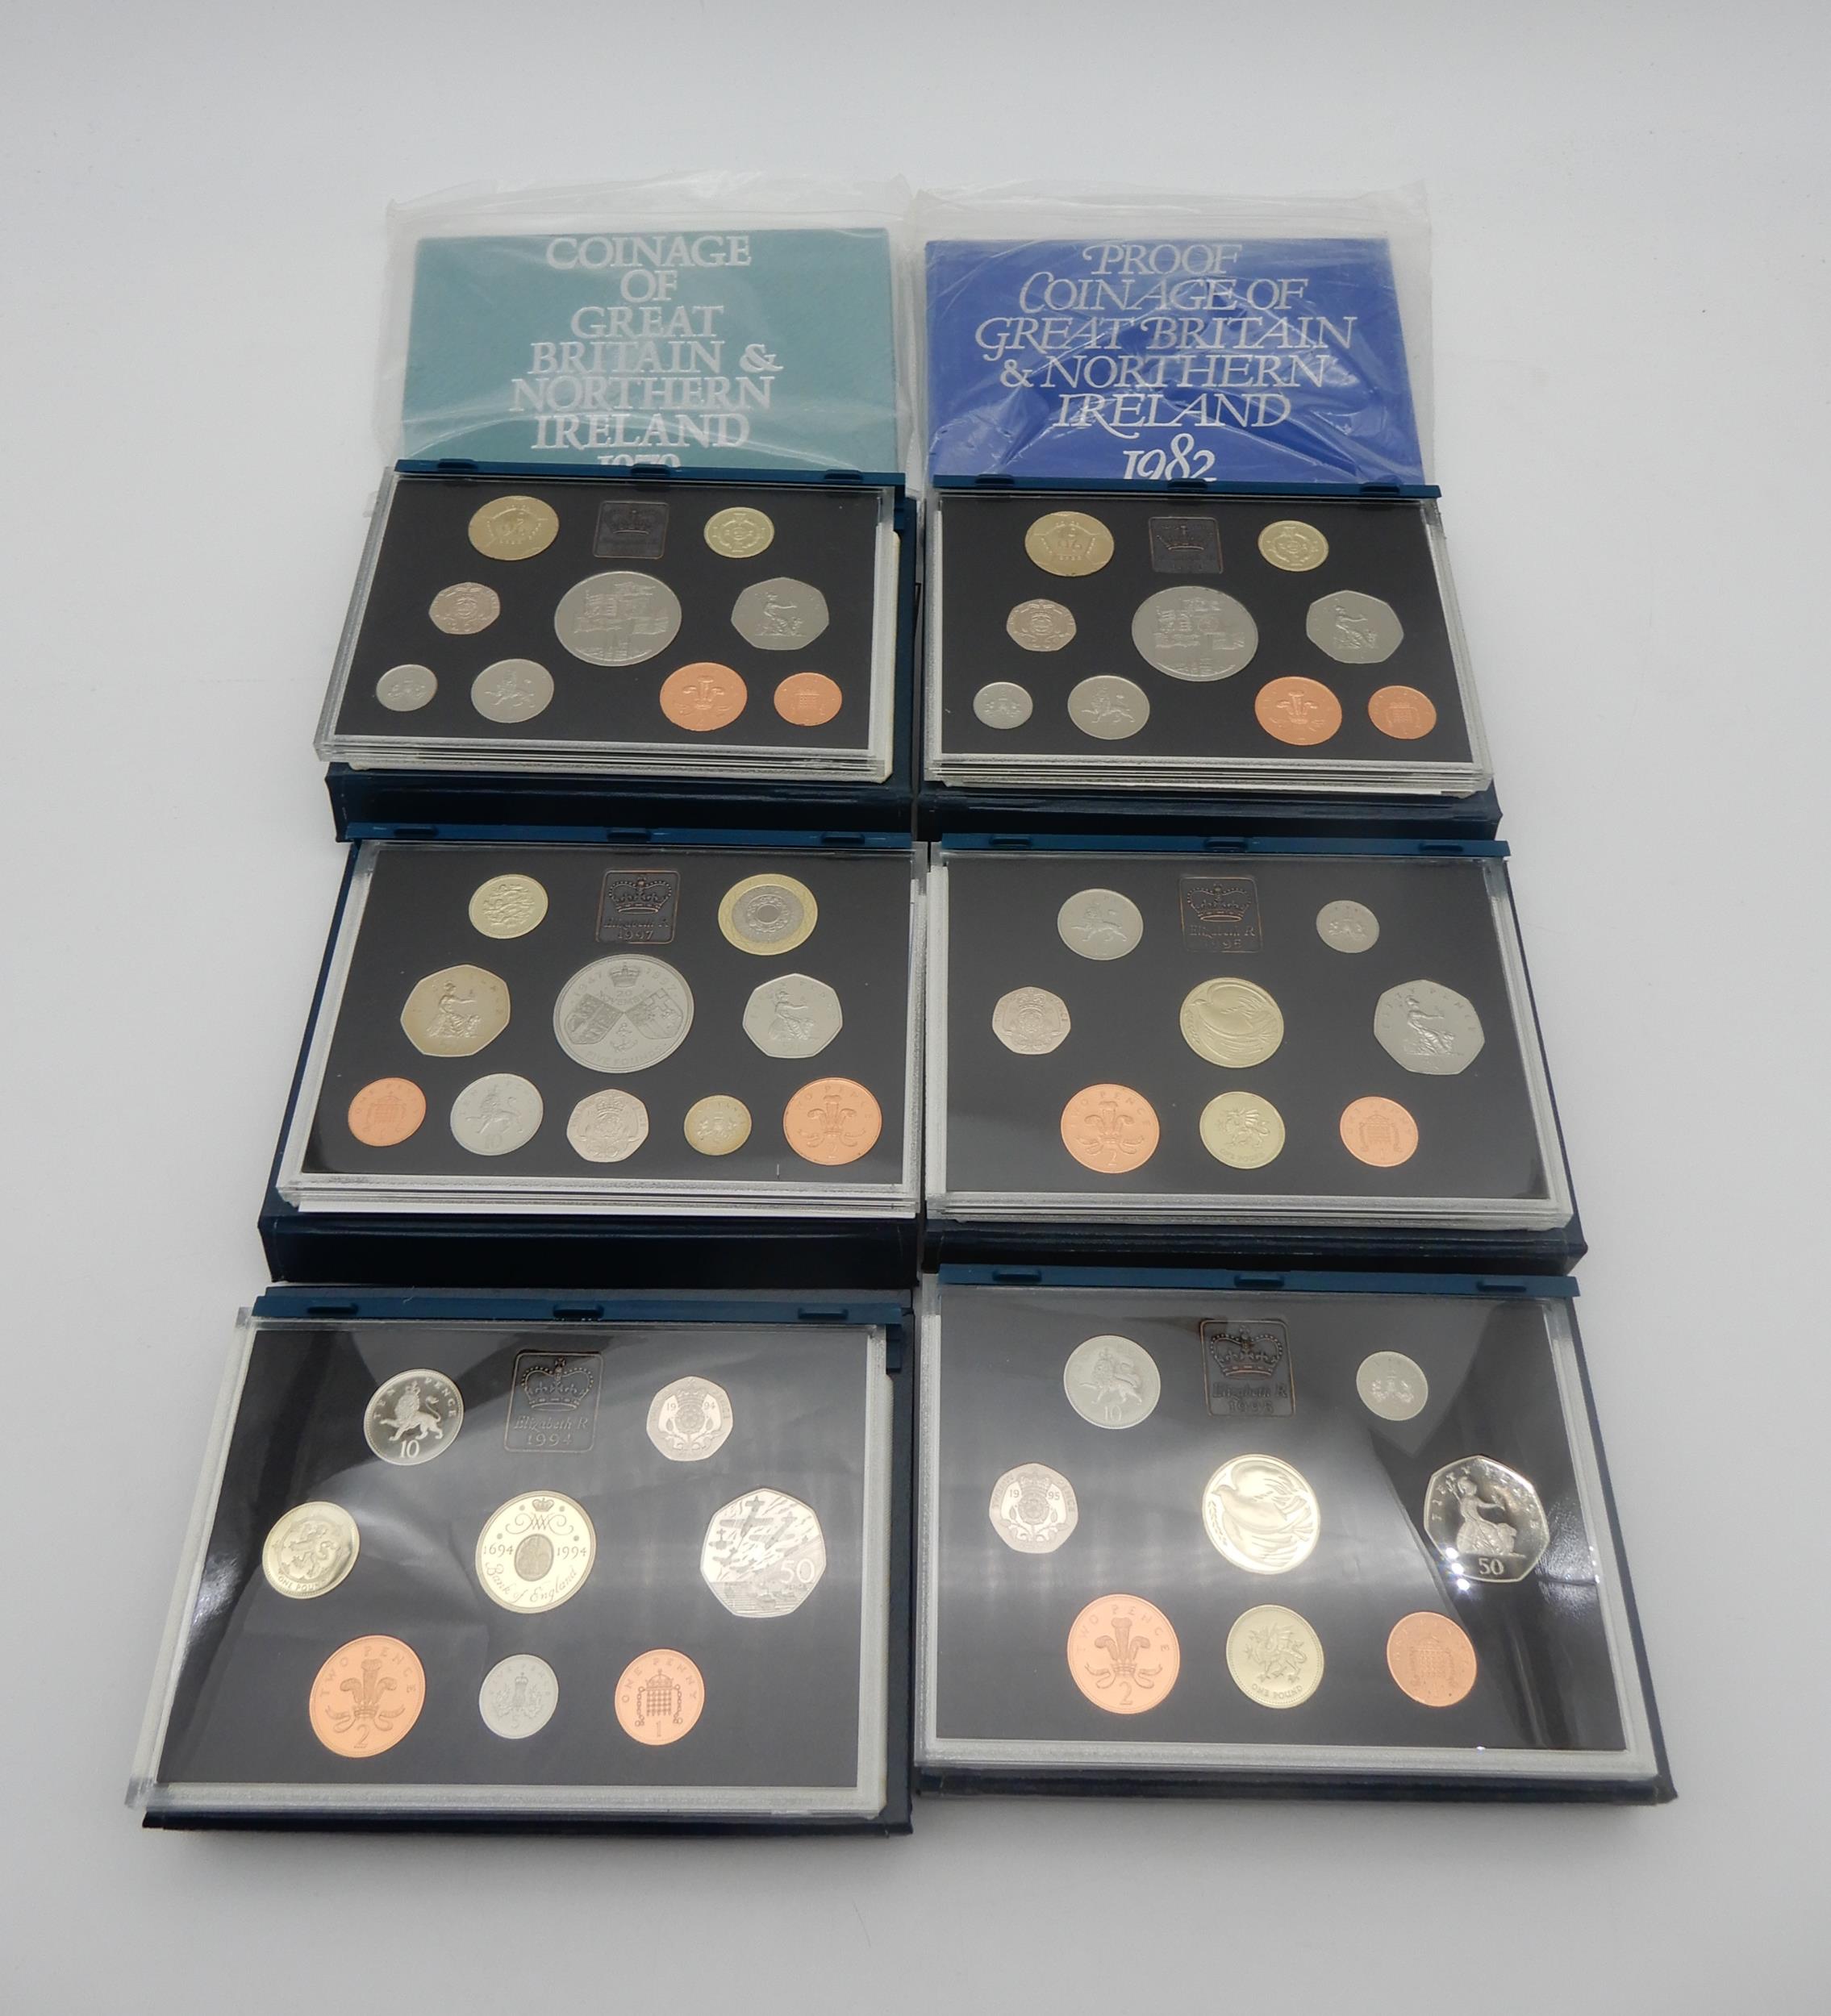 ROYAL MINT proof coin sets with examples through the 1990's together with 1979 and 1982 Condition